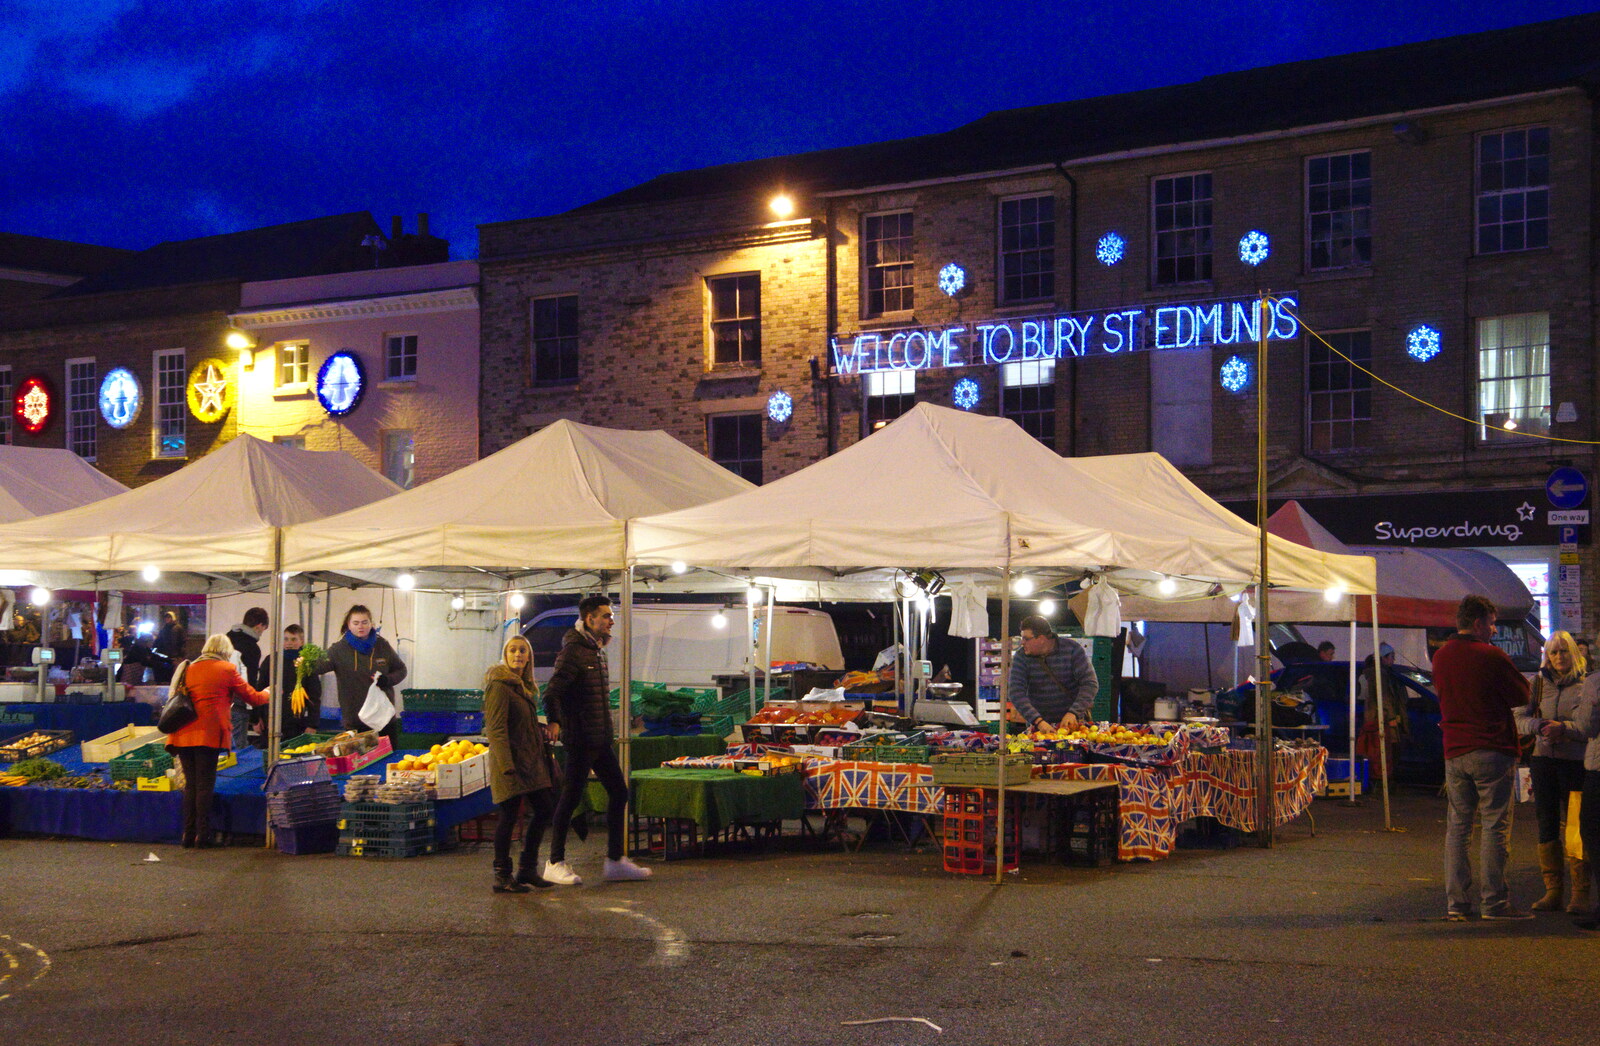 The Saturday market in Bury St. Edmunds from Pizza Express and a School Quiz, Bury St. Edmunds and Eye, Suffolk - 30th November 2019